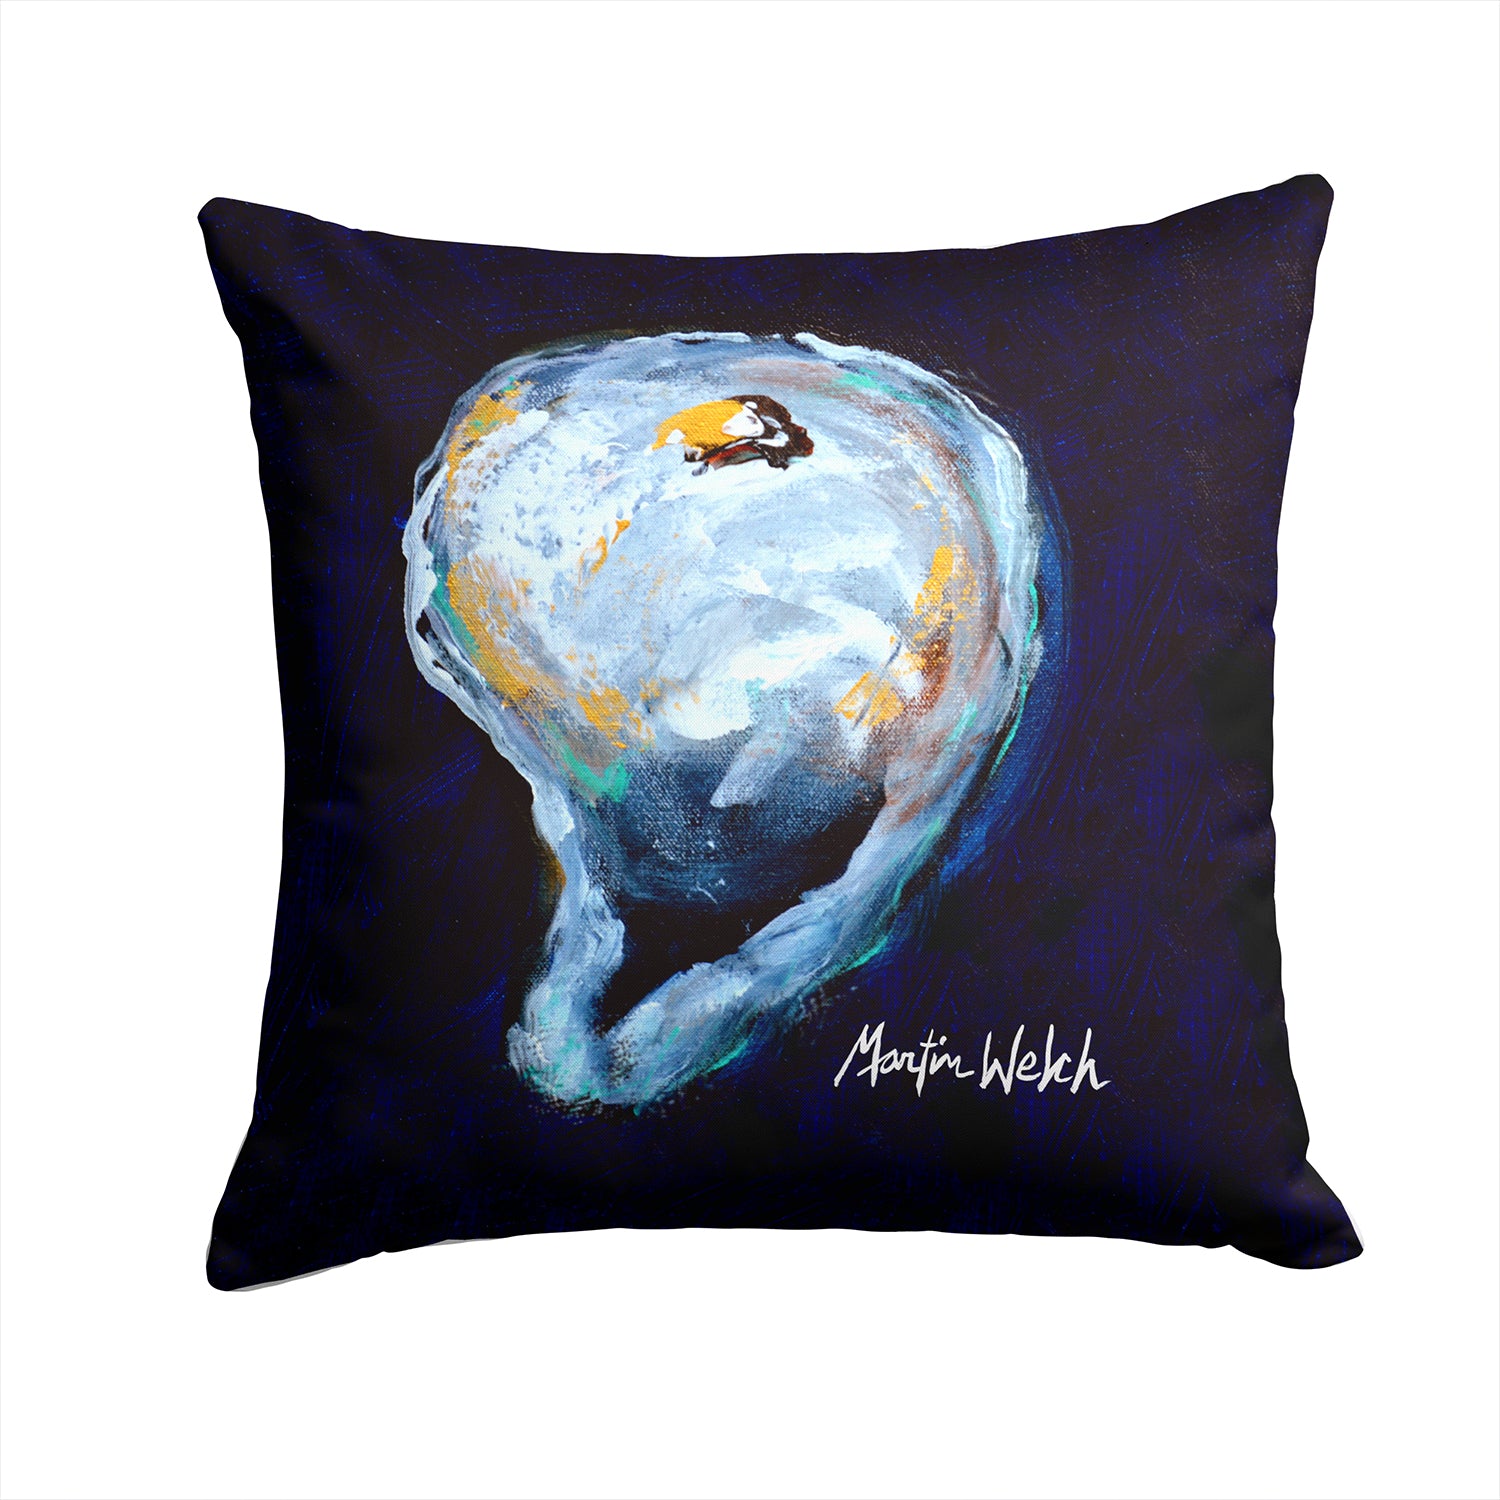 Buy this Oyster Give me one Fabric Decorative Pillow